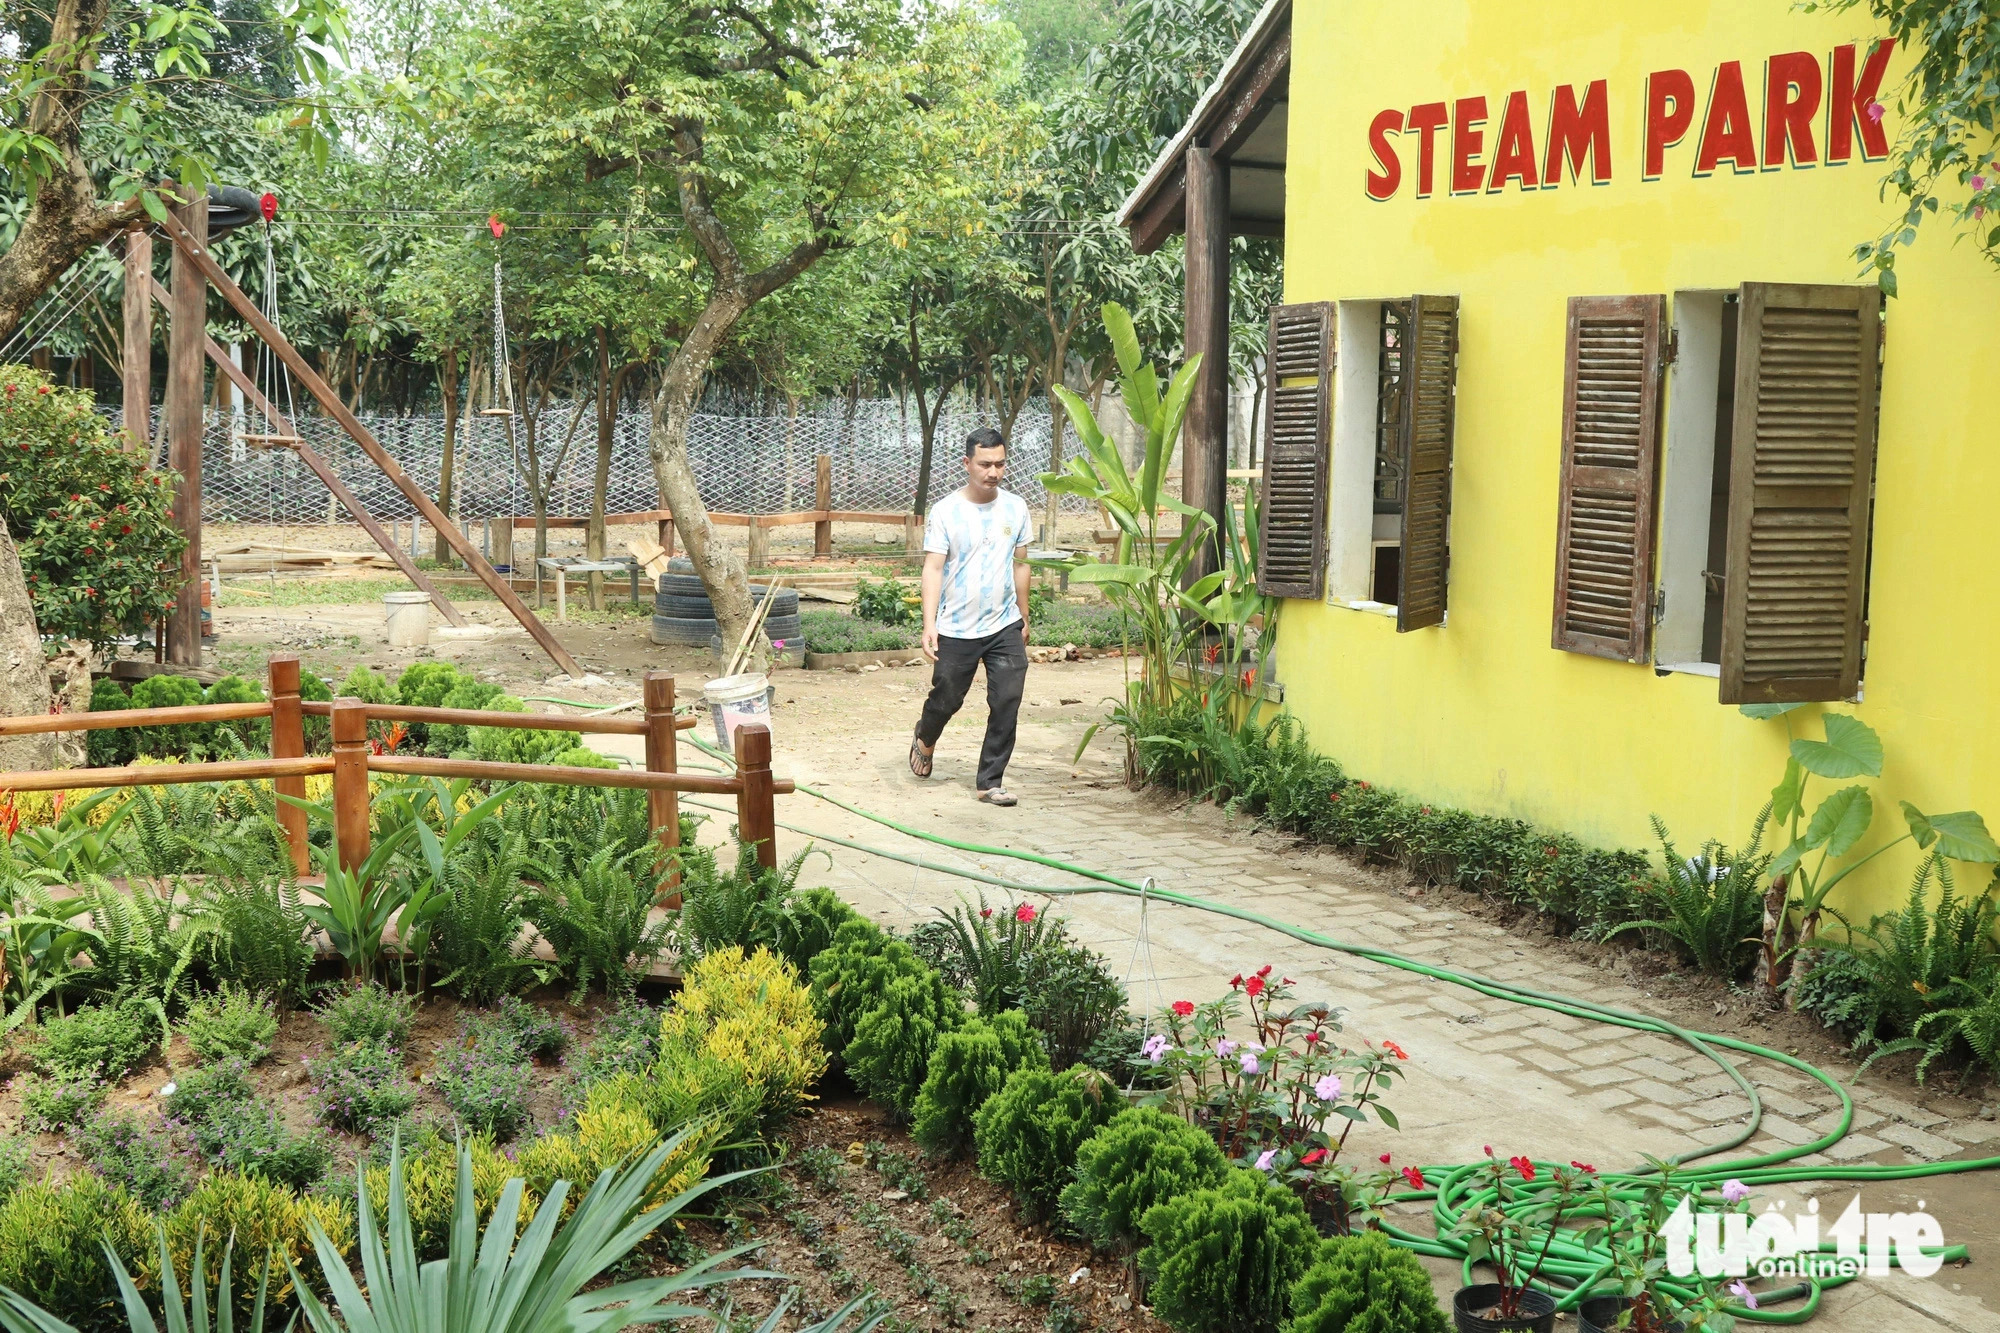 The park is expected to woo more visitors after being renovated. Photo: Doan Hoa / Tuoi Tre